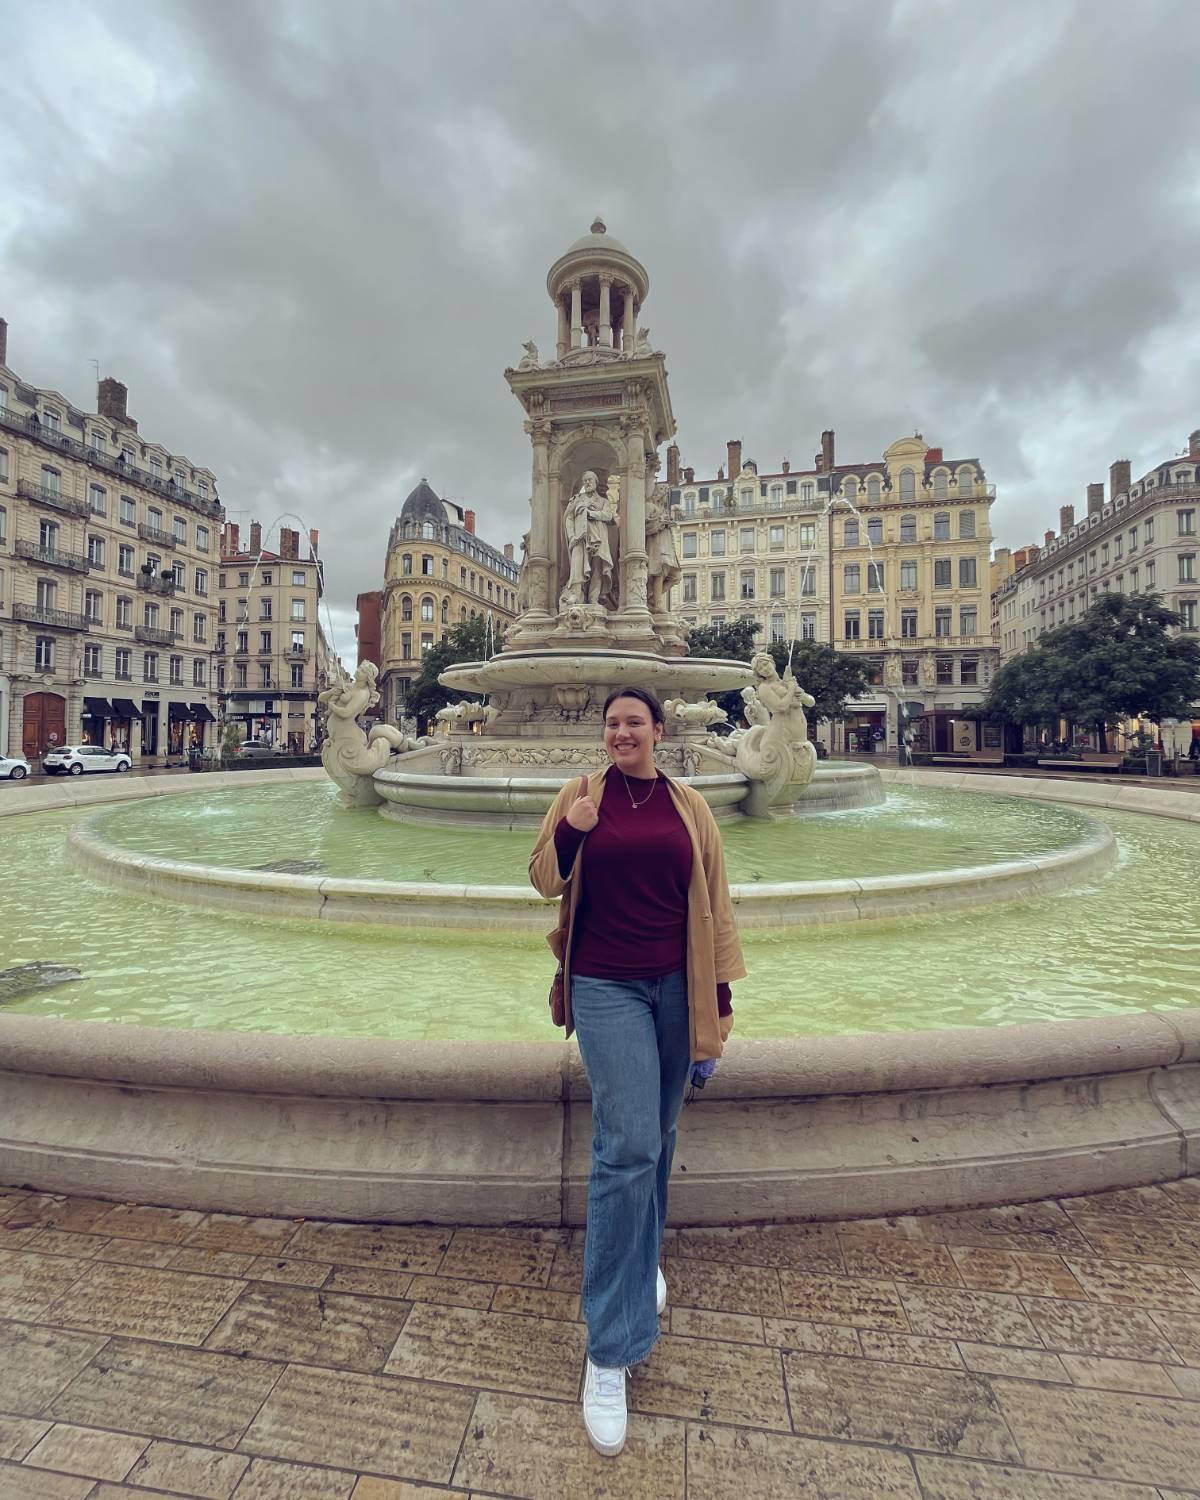 Madison Creech in front of an intricate fountain with old buildings behind it